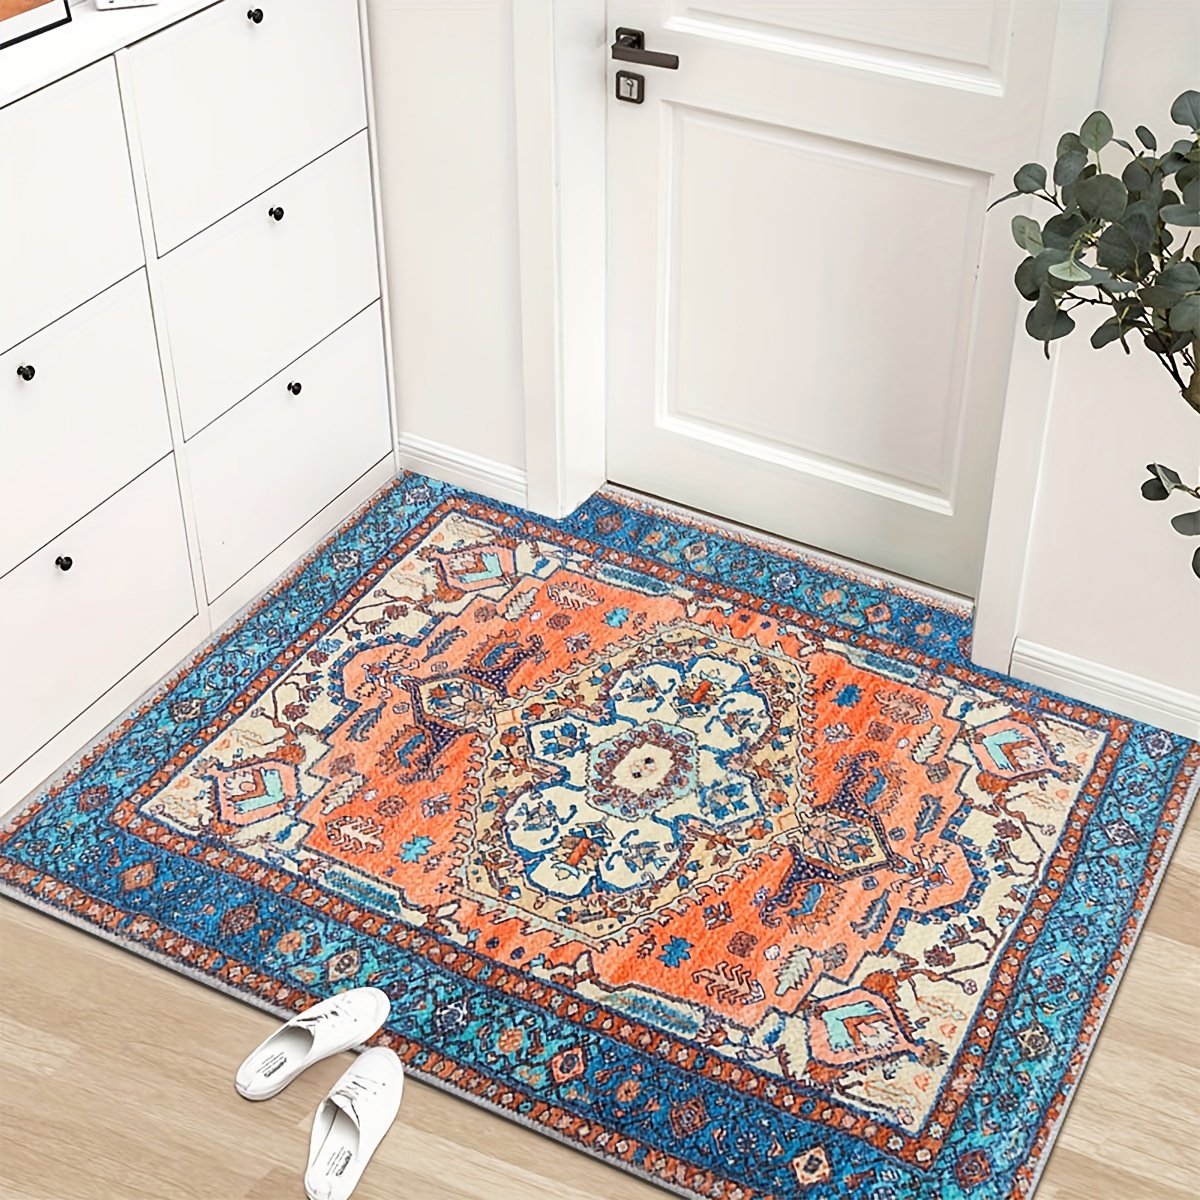 Lahome Boho Door Rugs for Entryway Indoor - 2x3 Washable Non-Slip Area Rug  Small Rugs for Bedroom Throw Thin Kitchen Rugs Bathroom Mat, Blue Medallion